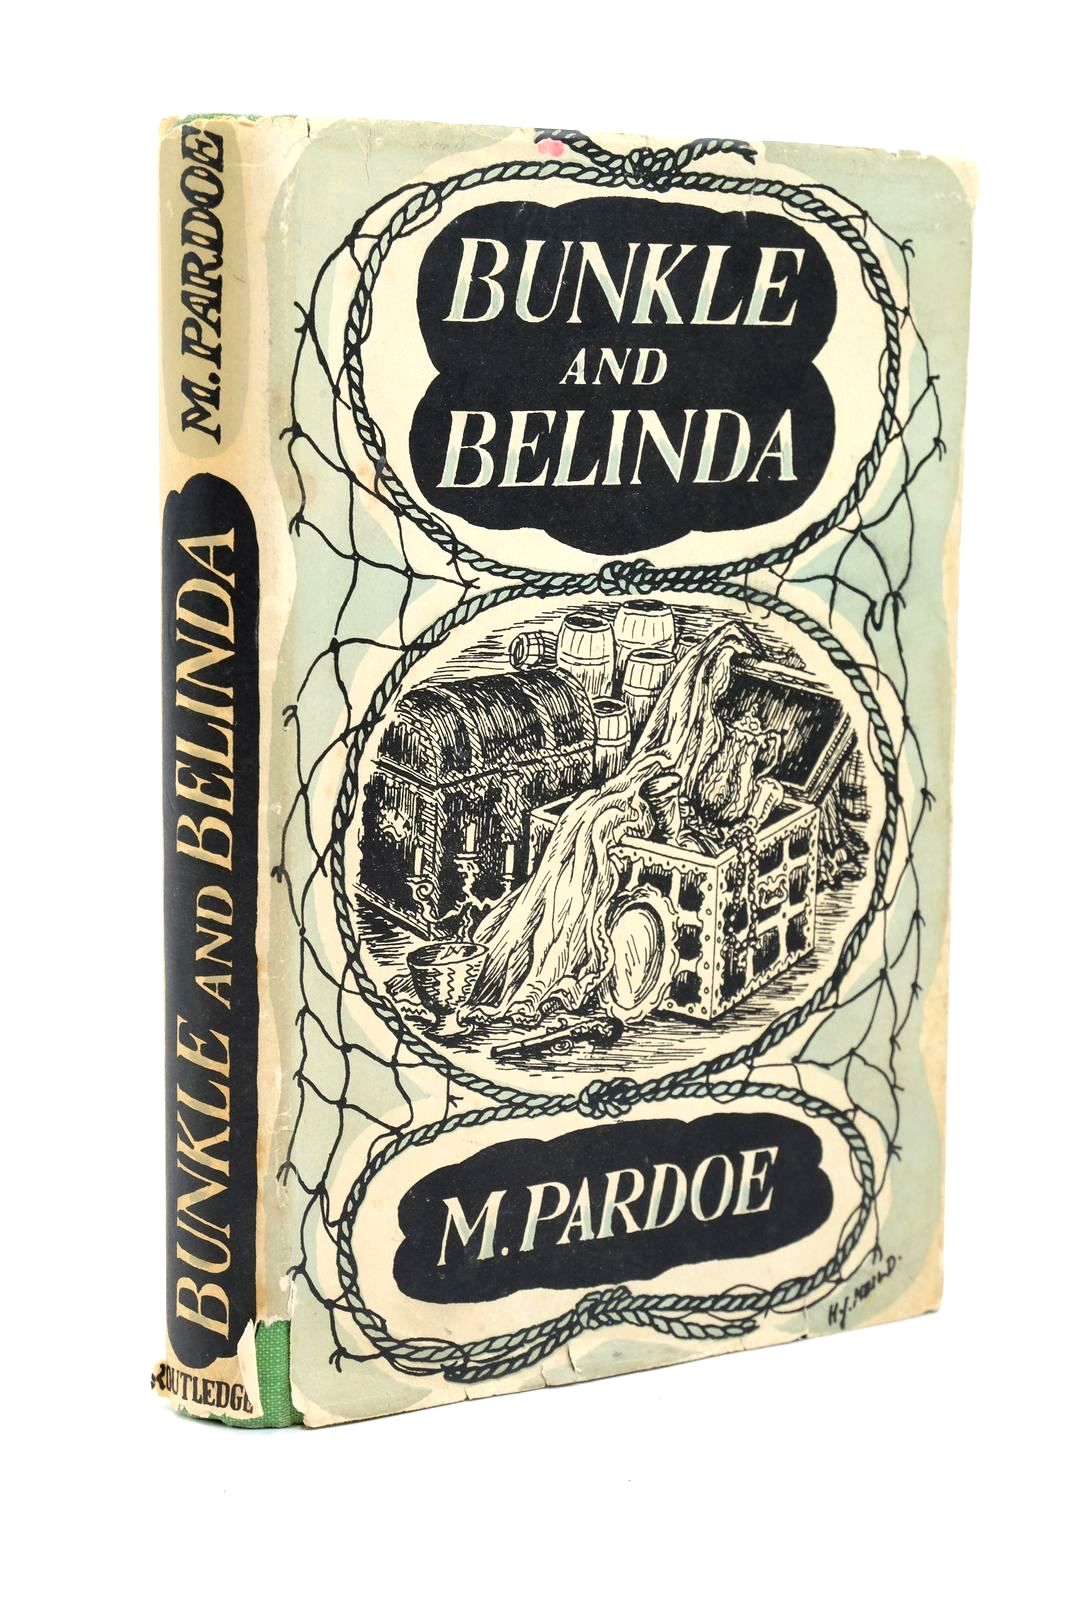 Photo of BUNKLE AND BELINDA written by Pardoe, M. illustrated by Neild, Julie published by Routledge &amp; Kegan Paul (STOCK CODE: 1322968)  for sale by Stella & Rose's Books